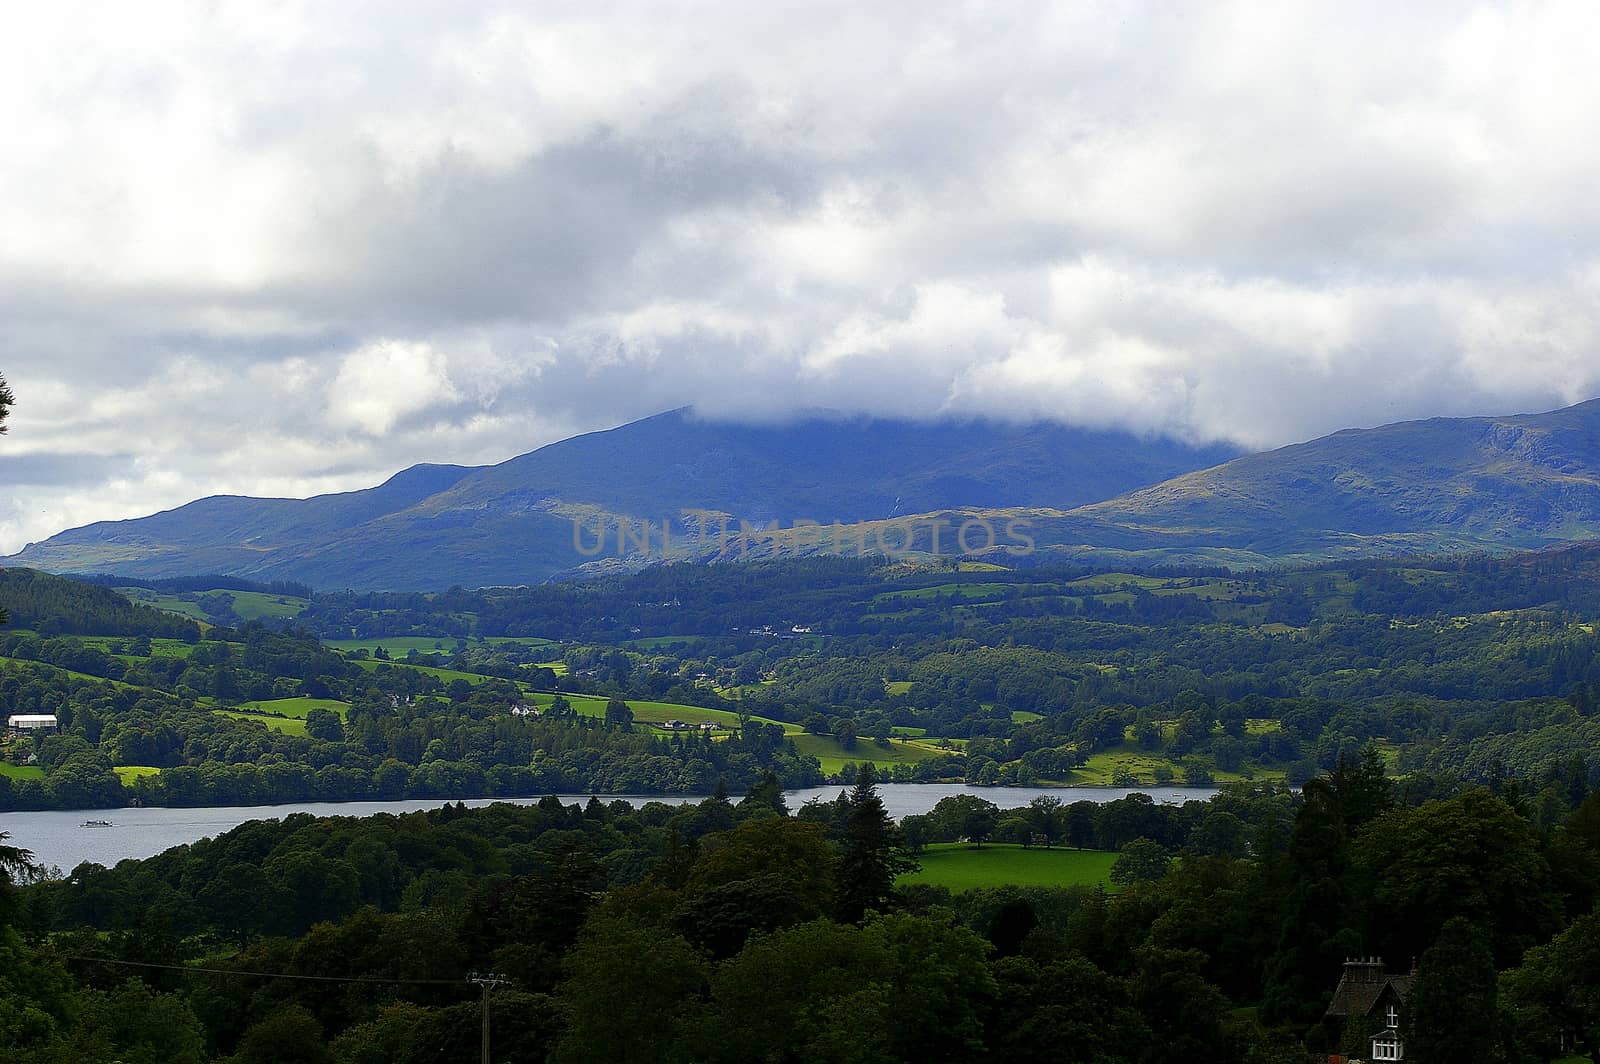 Clouds rolling over Lake Windermere in Britain's Lake District